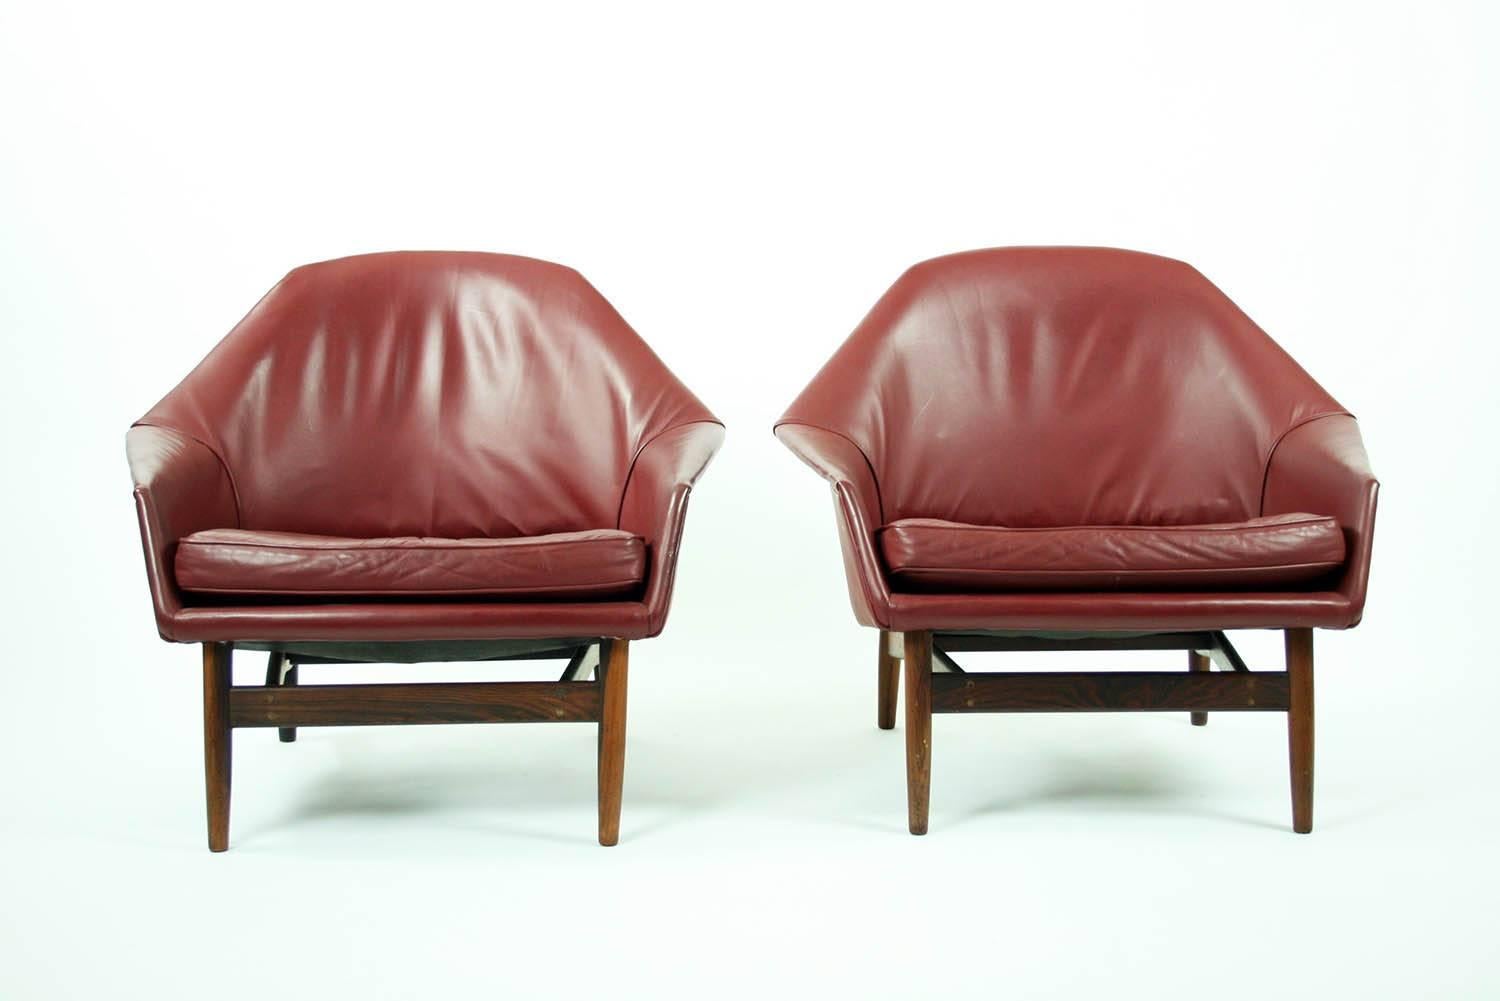 Mid-Century Modern Pair of Rosewood and Leather Lounge Chairs by Ib Kofod Larsen for Carlo Gahrn